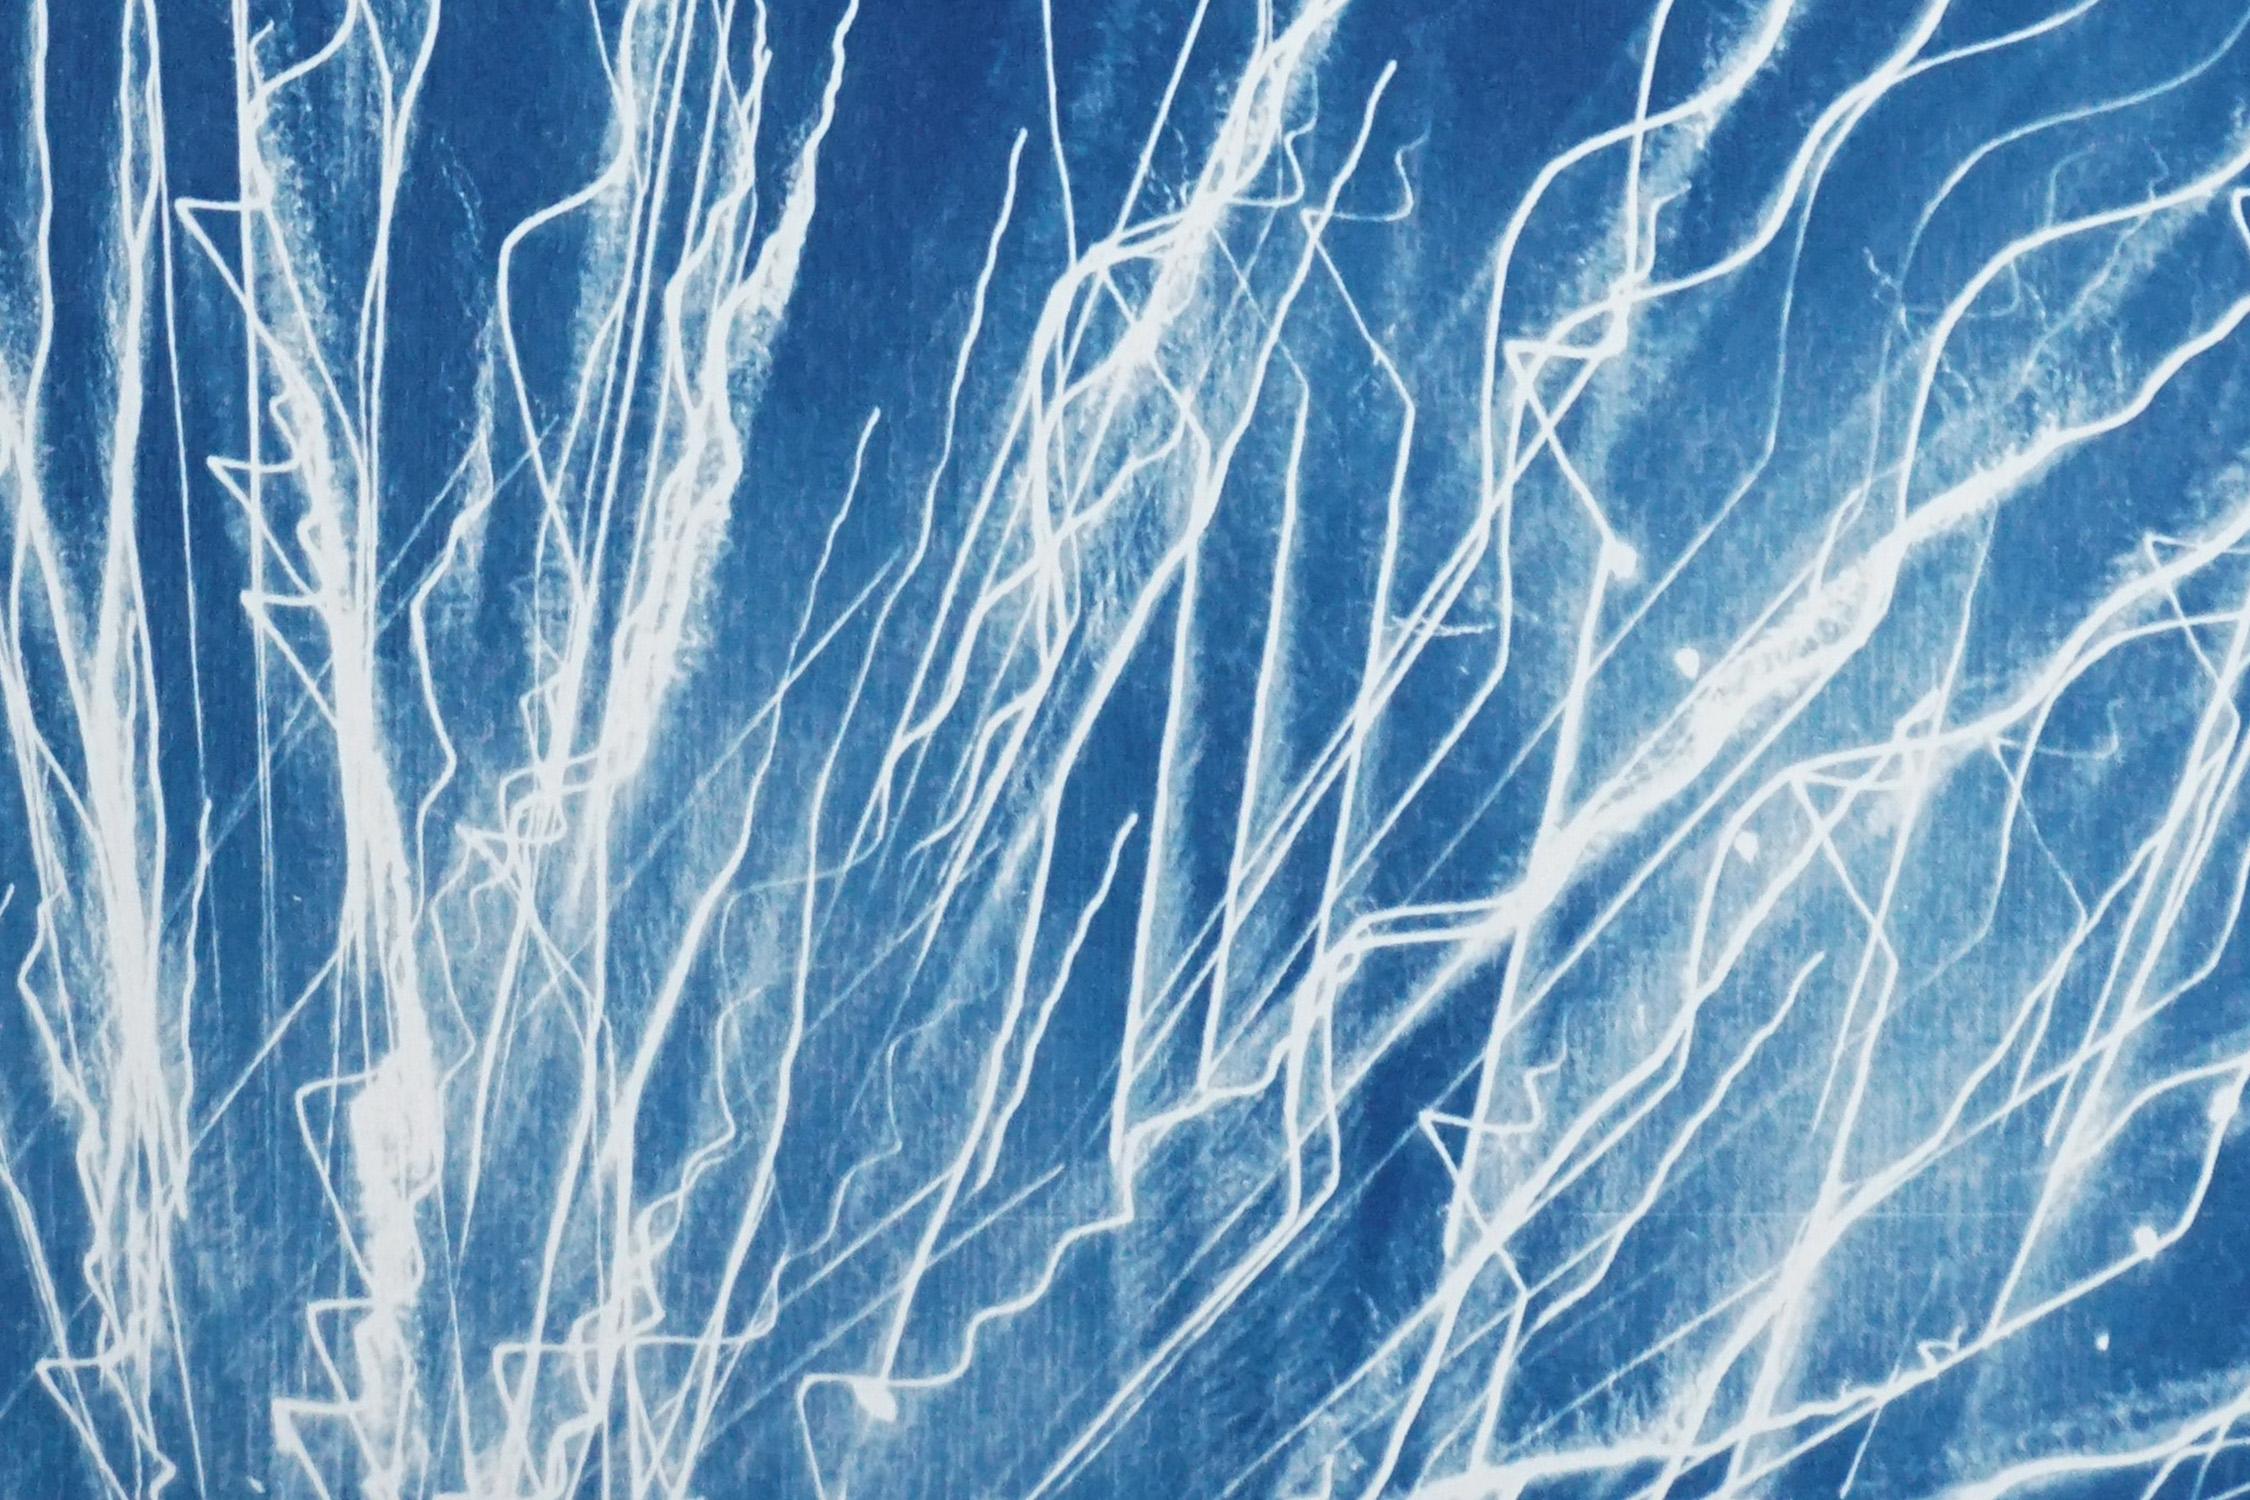 This is an exclusive handprinted limited edition cyanotype.
